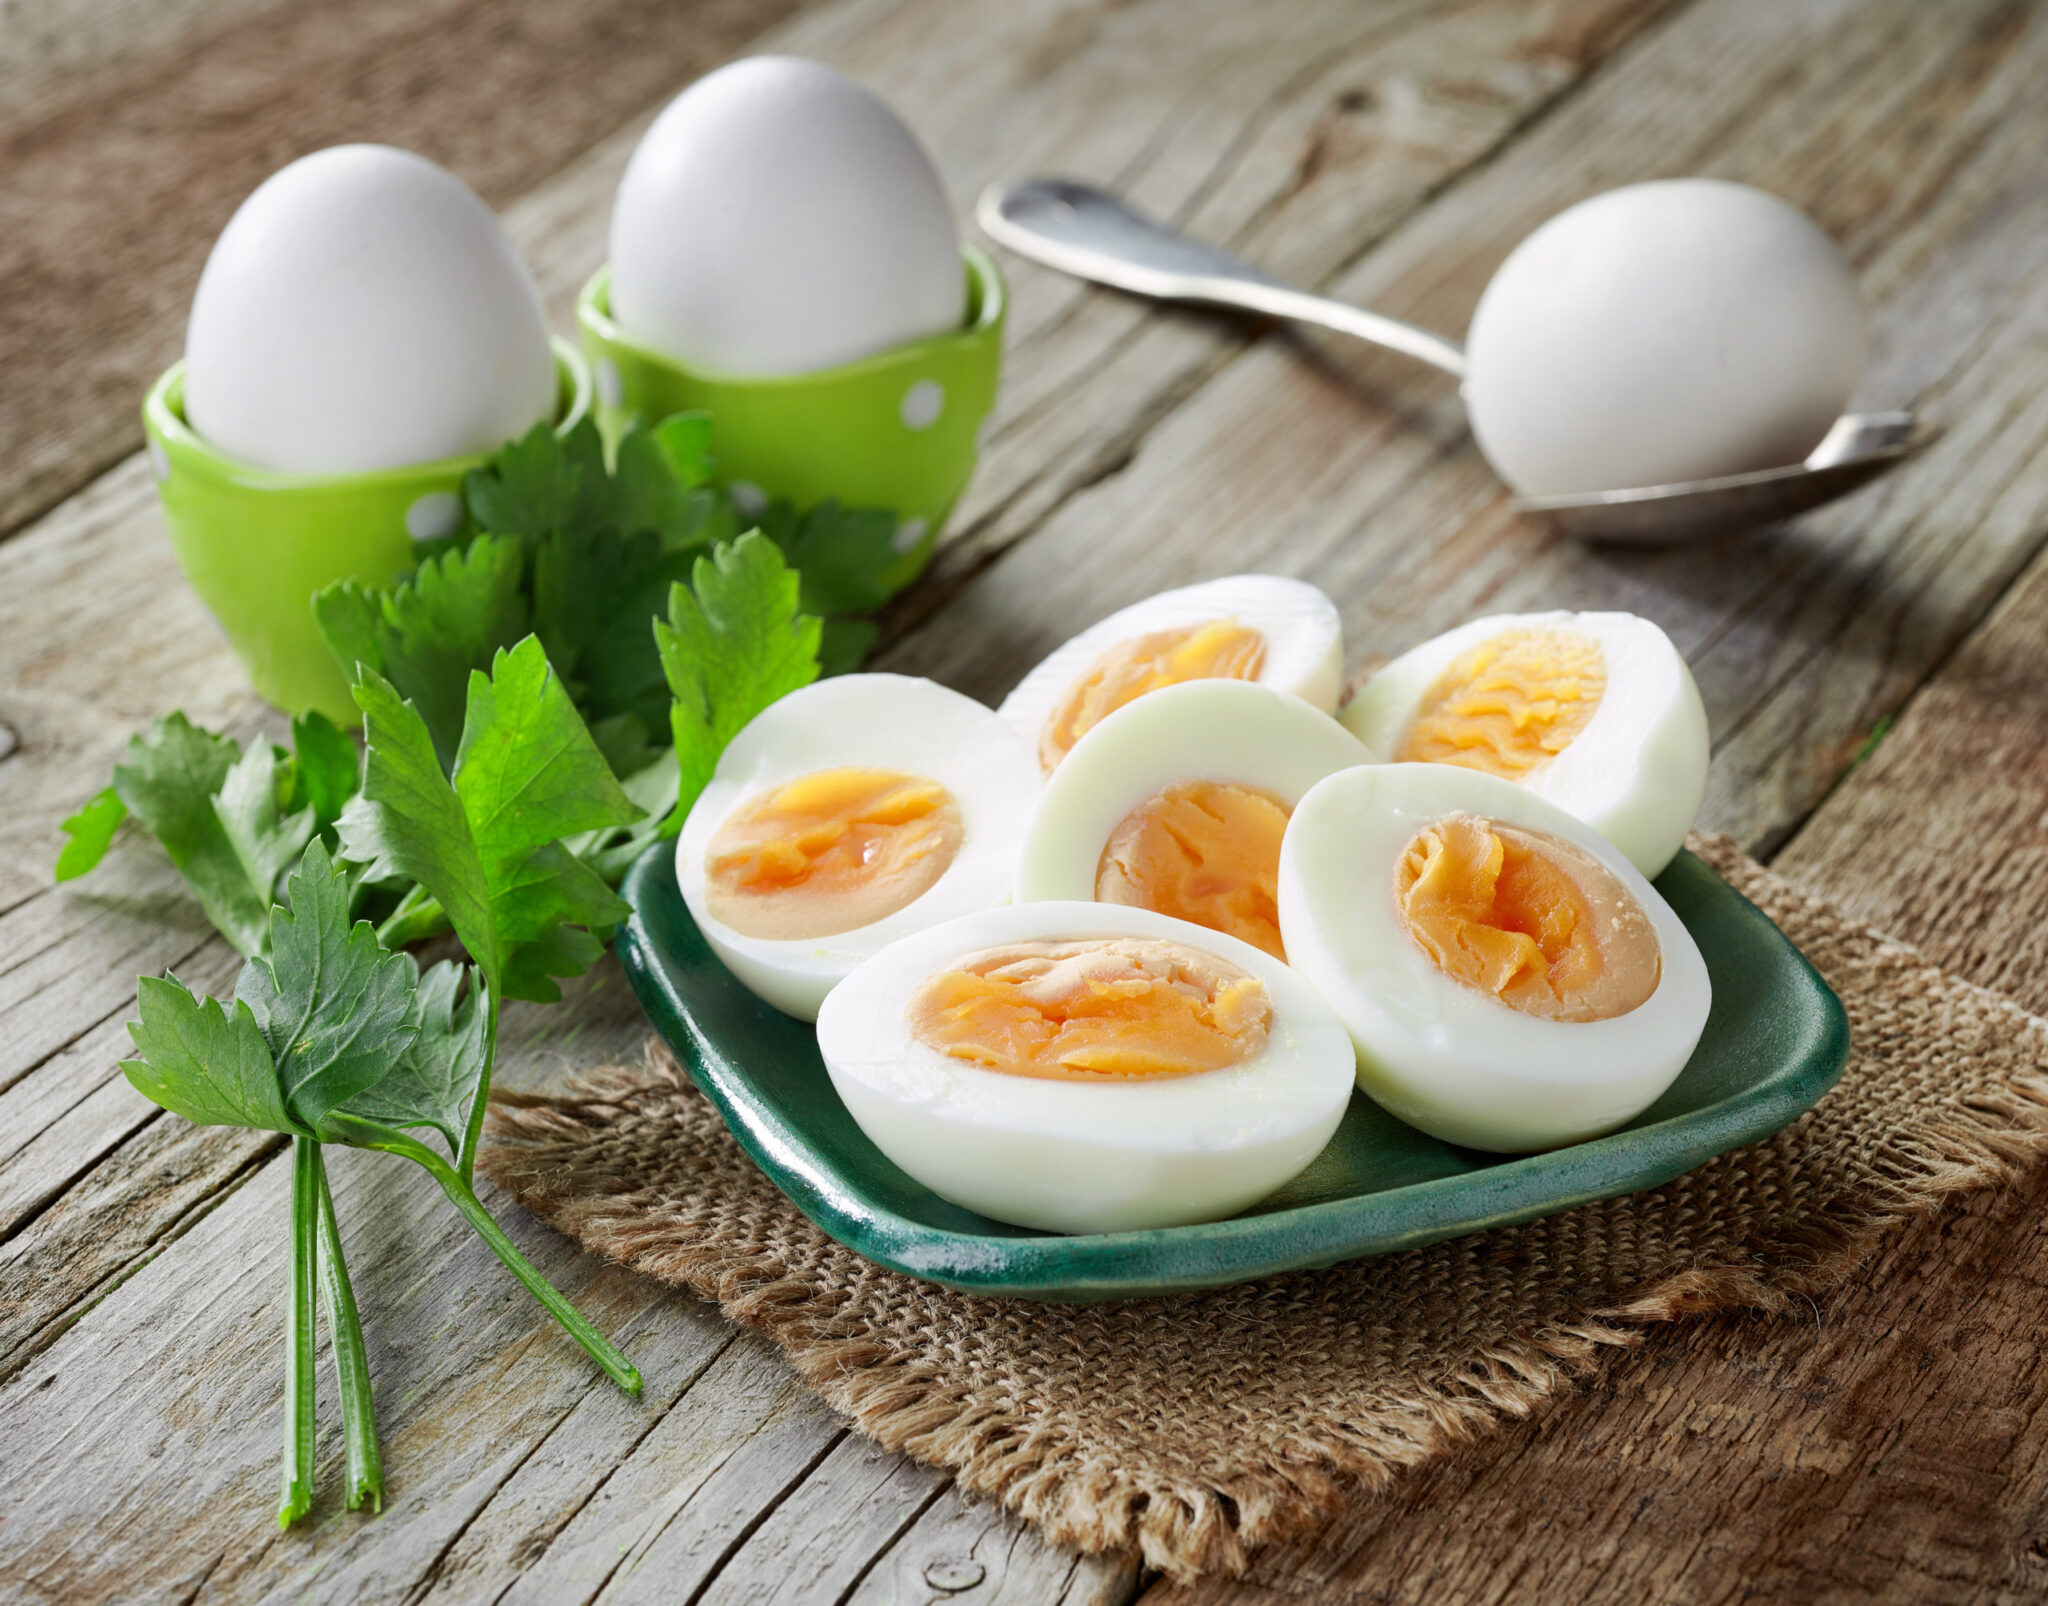 Boiled Egg Diet is the WORST for Weight Loss - TheHealthMania